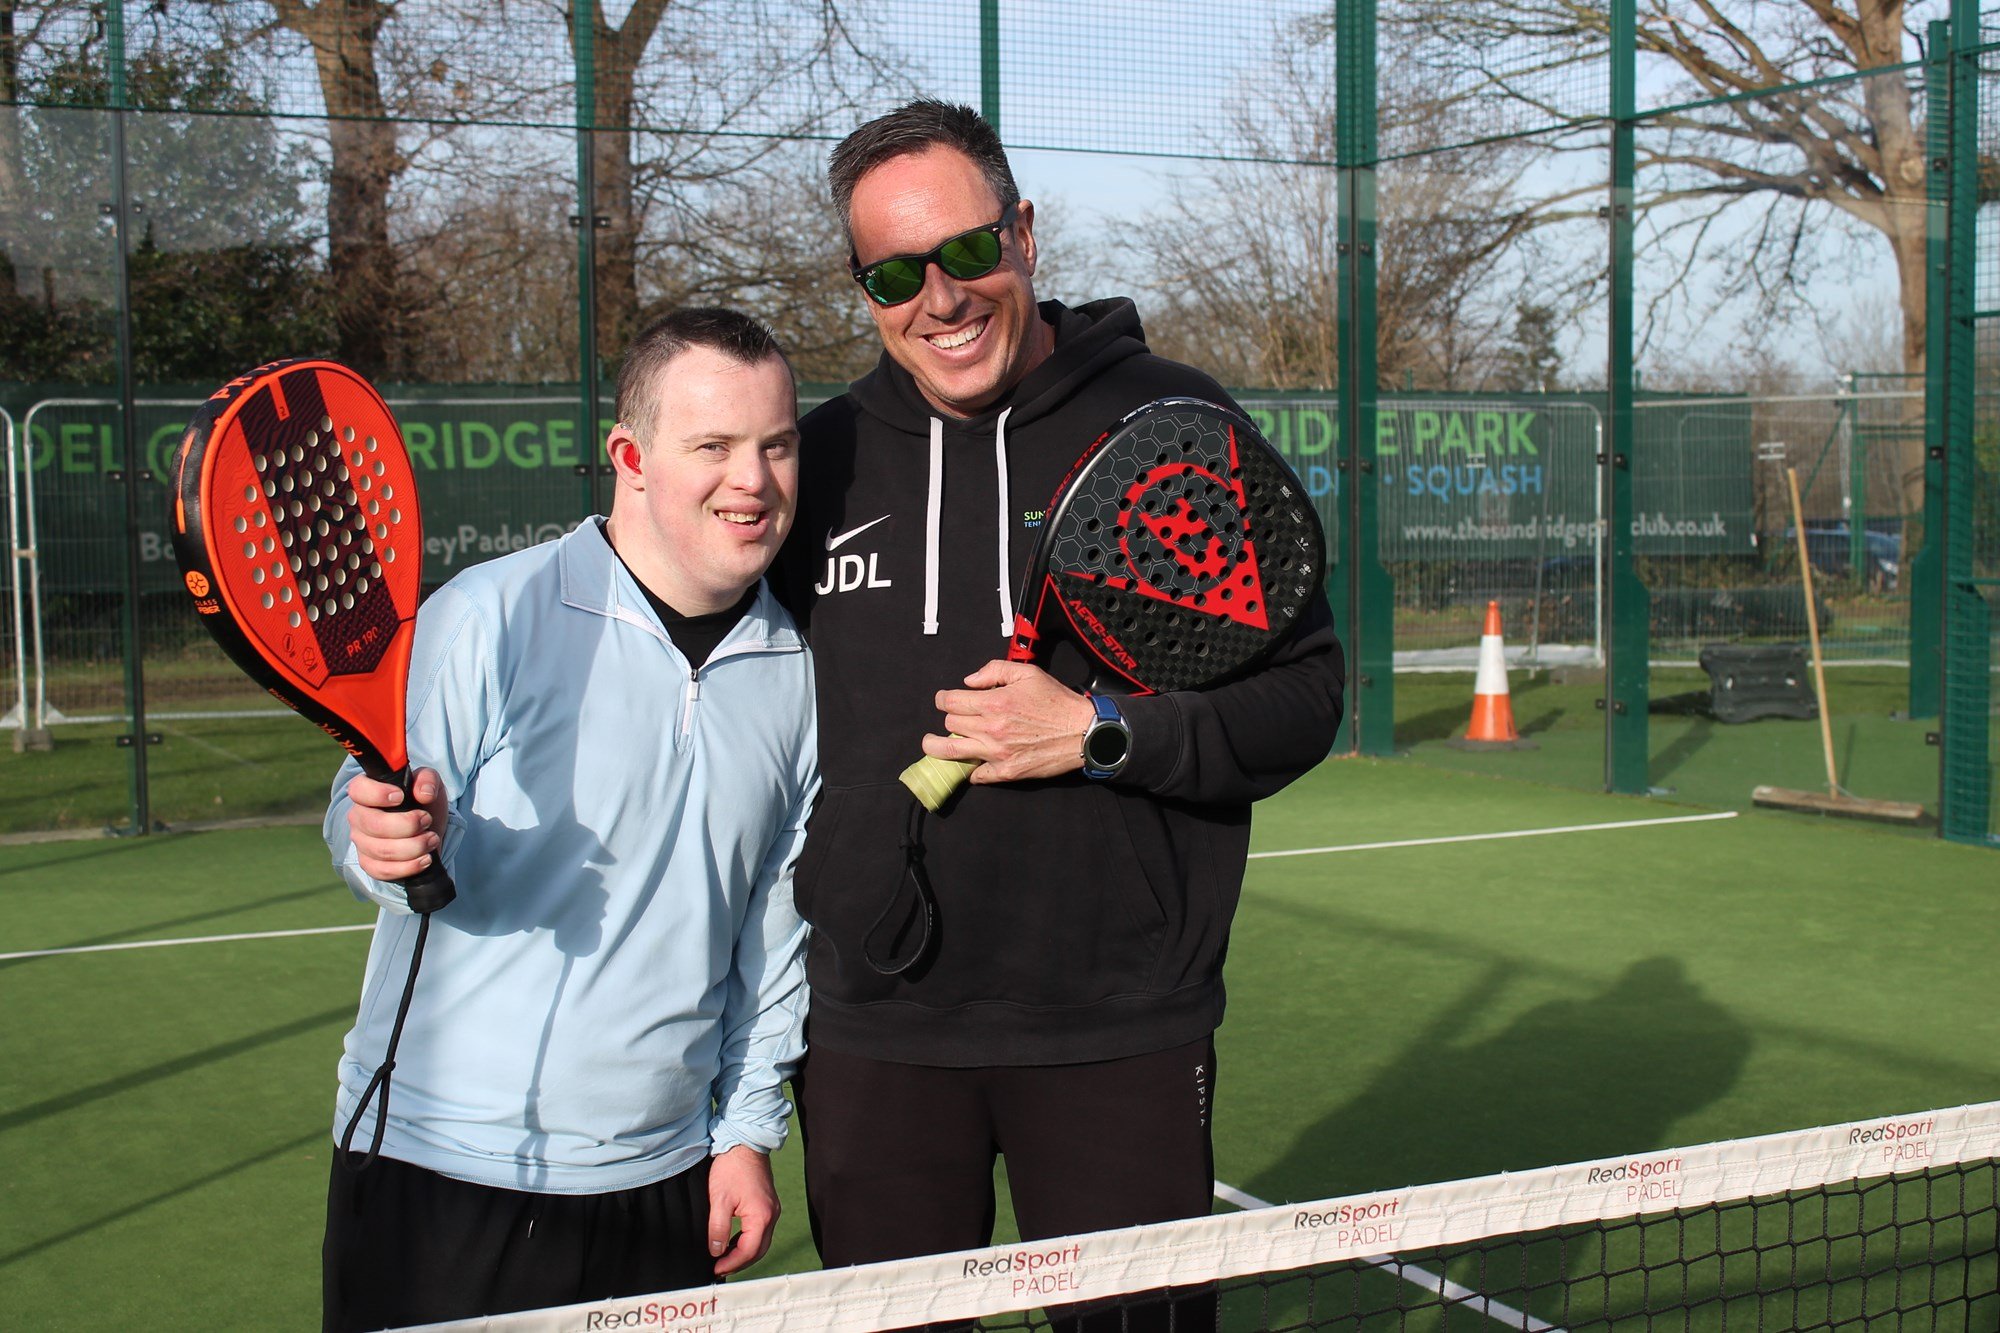 Two men standing side by side, both holding padel bats. One man is wearing all back and is smiling, while the other, standing on the left and also smiling, is wearing a blue top